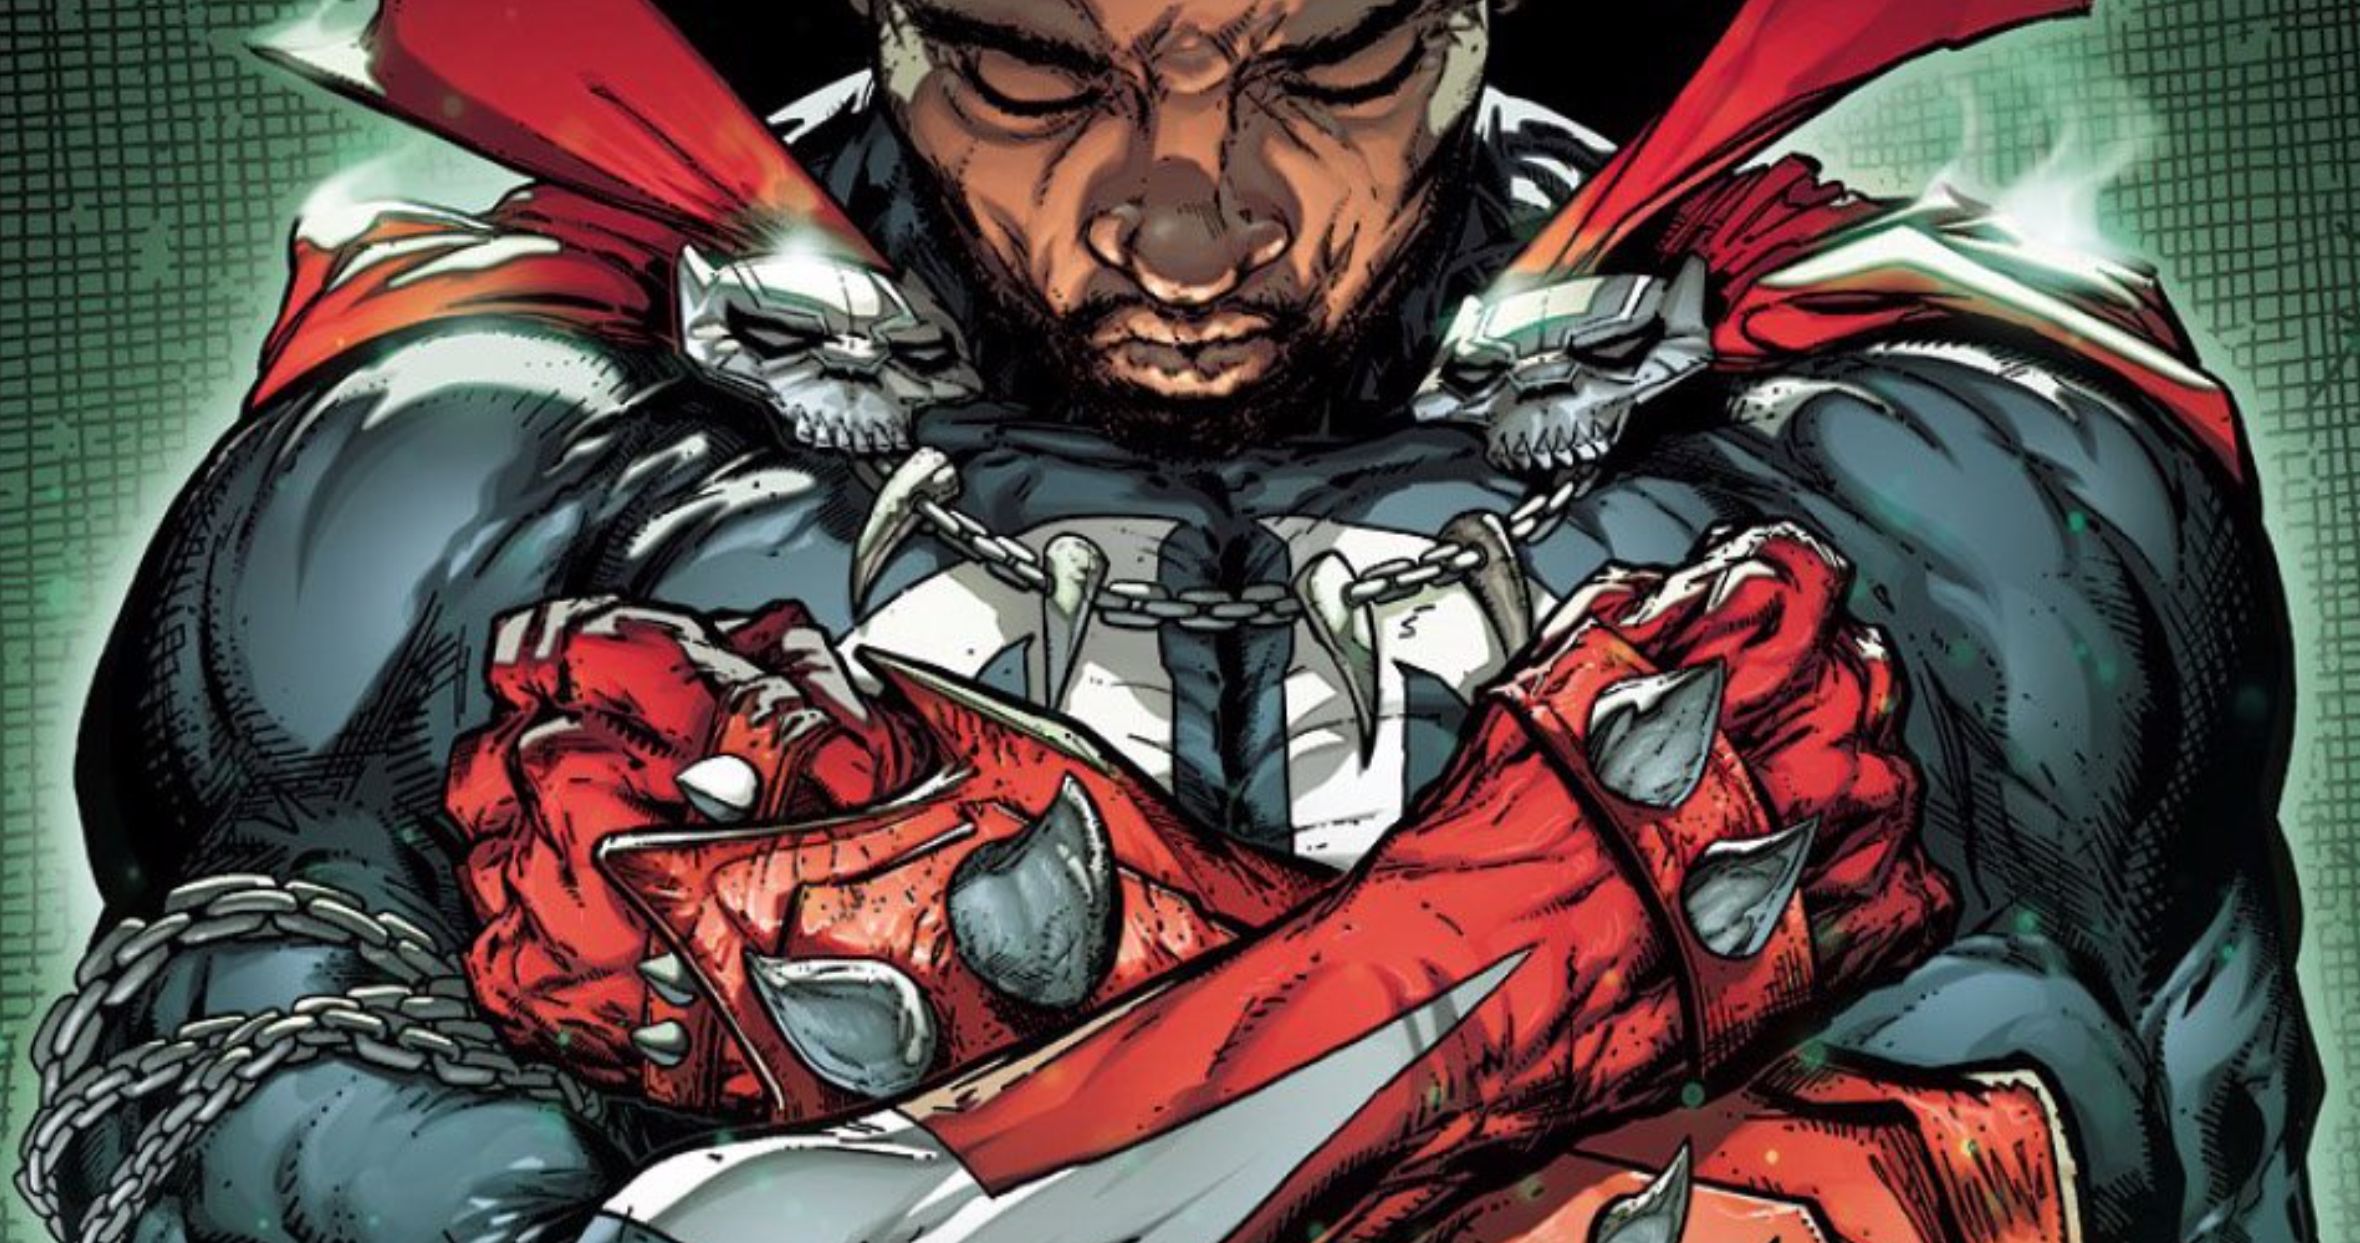 Black Panther Inspired Spawn Tribute Cover Celebrates Chadwick Boseman's Legacy